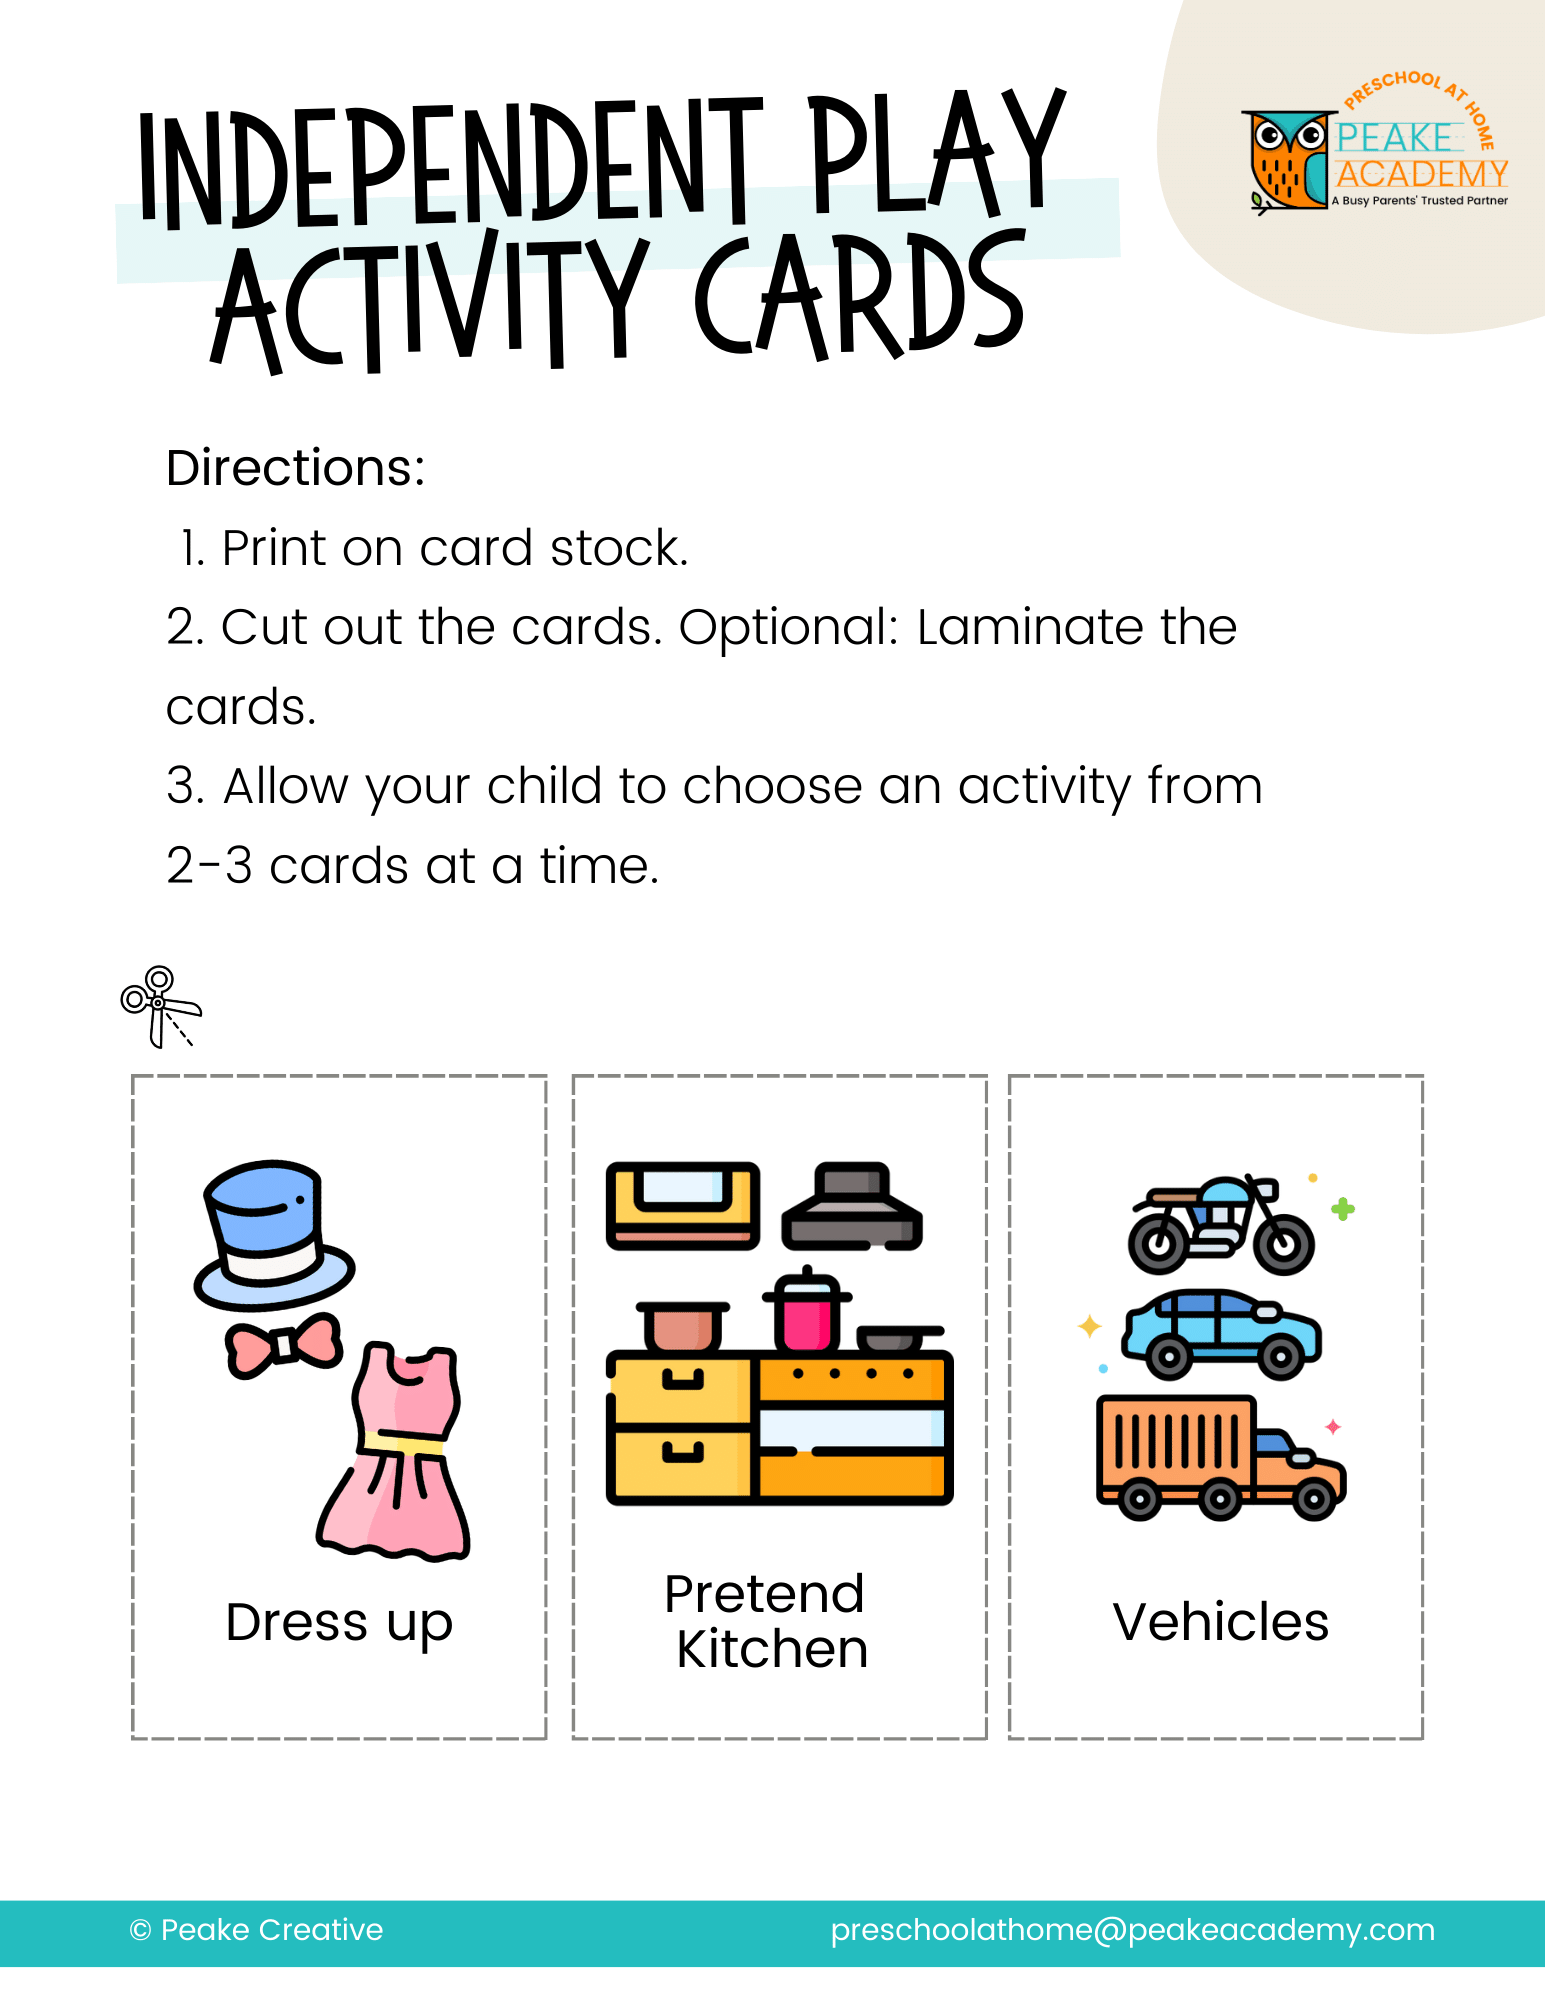 Independent Play Activity Cards_Peake Academy.png